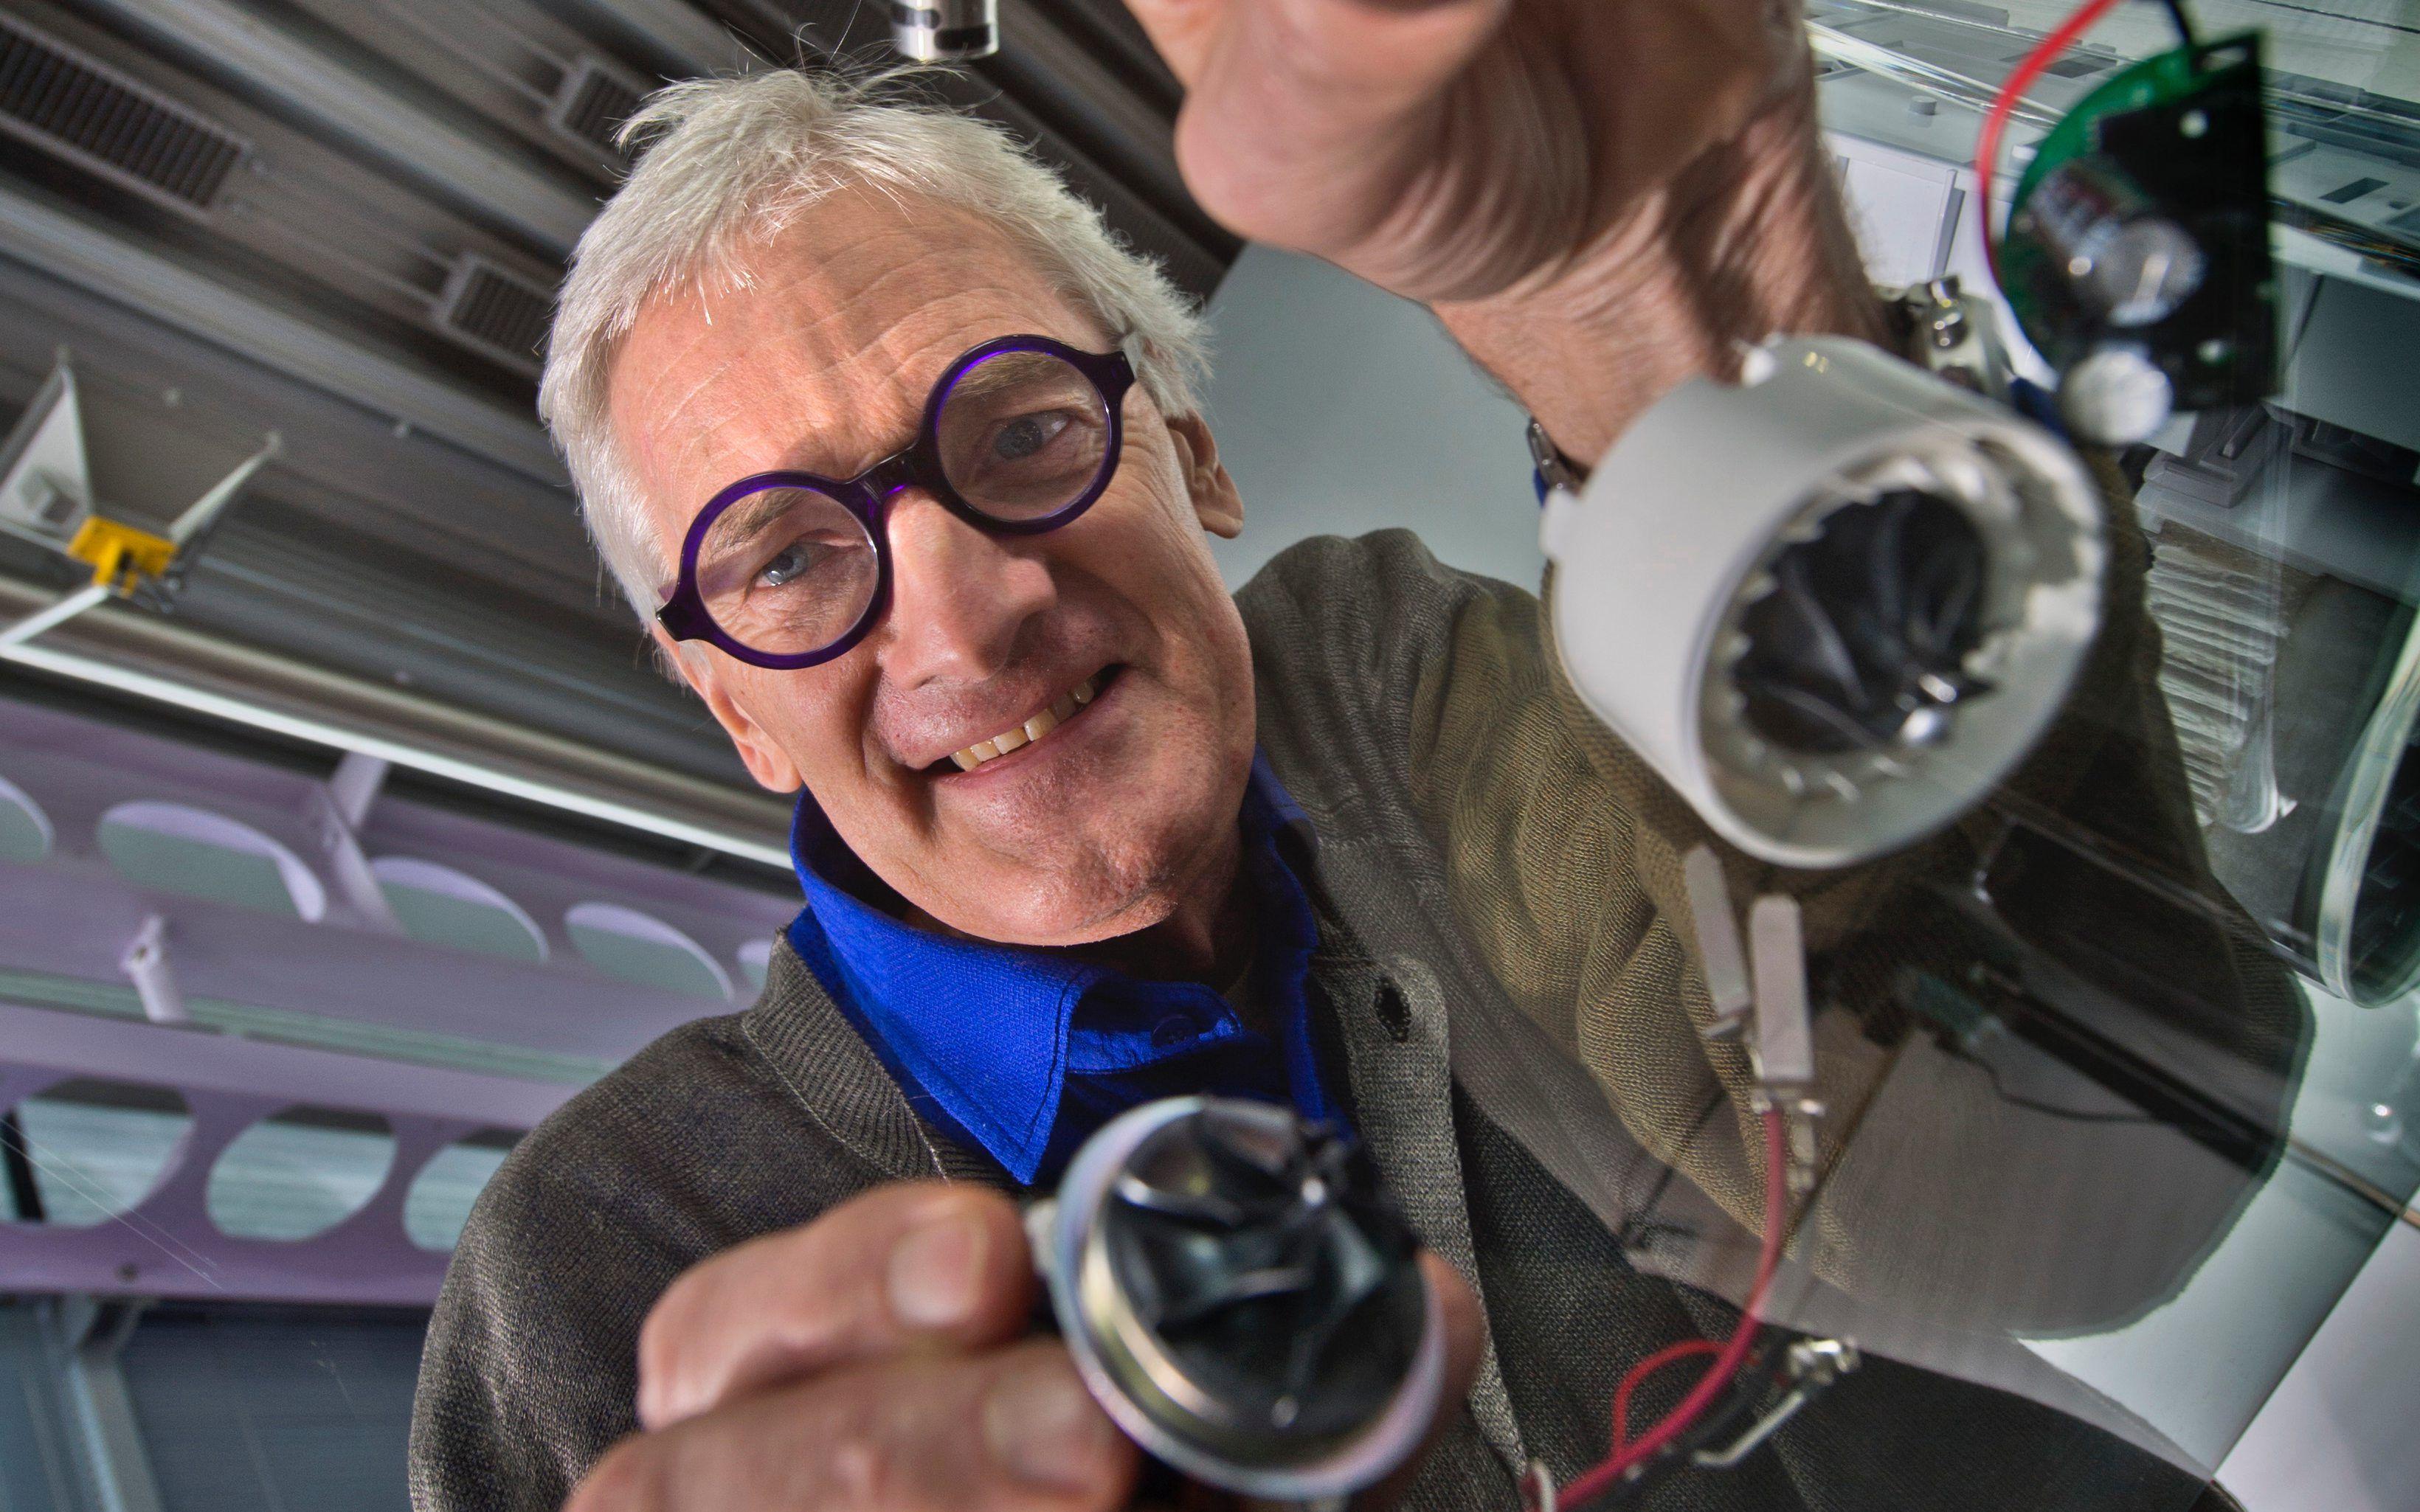 James Dyson Talks About "Tinkering"